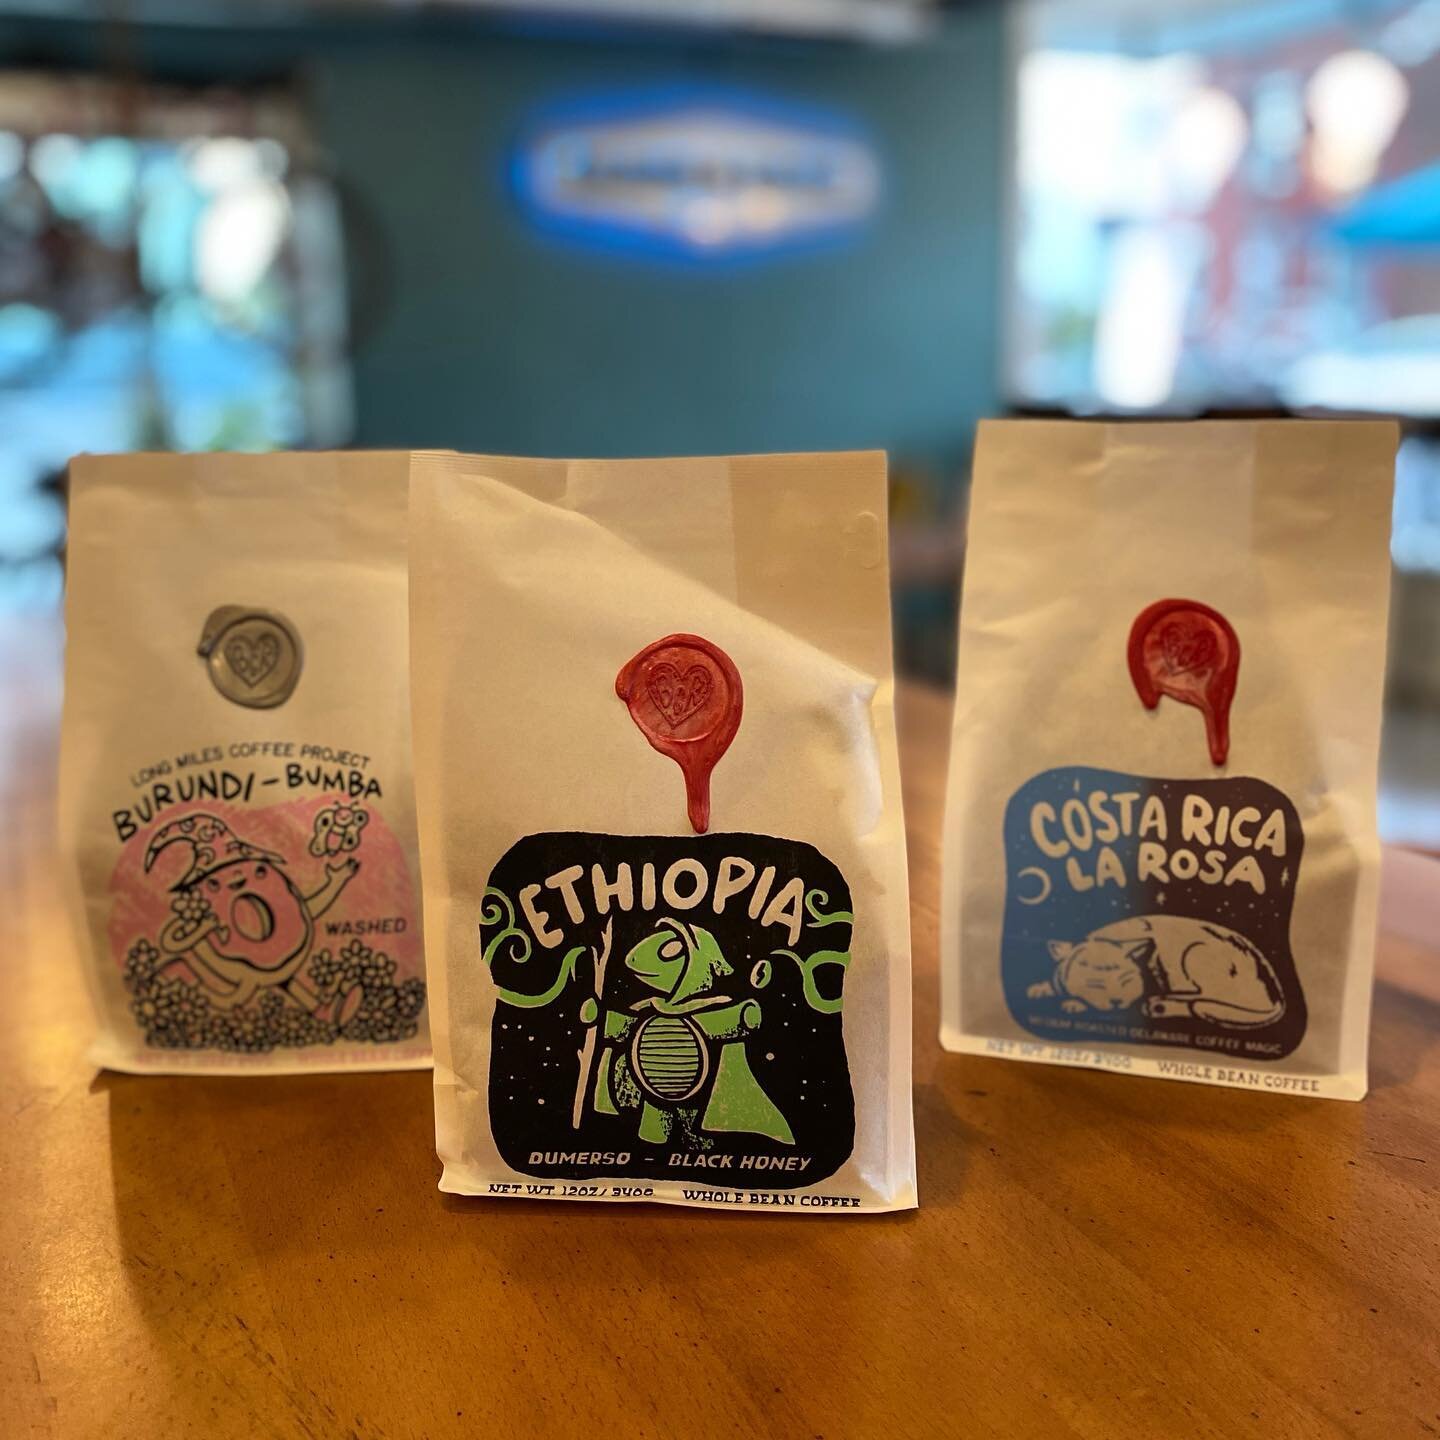 New coffees in from @brandywinecoffeeroasters! Come on in and try some of this coffee magic 🪄
.
.
.
#slowbikesslowcoffee #coffeemagic #getitdowntownfrederick #getsome